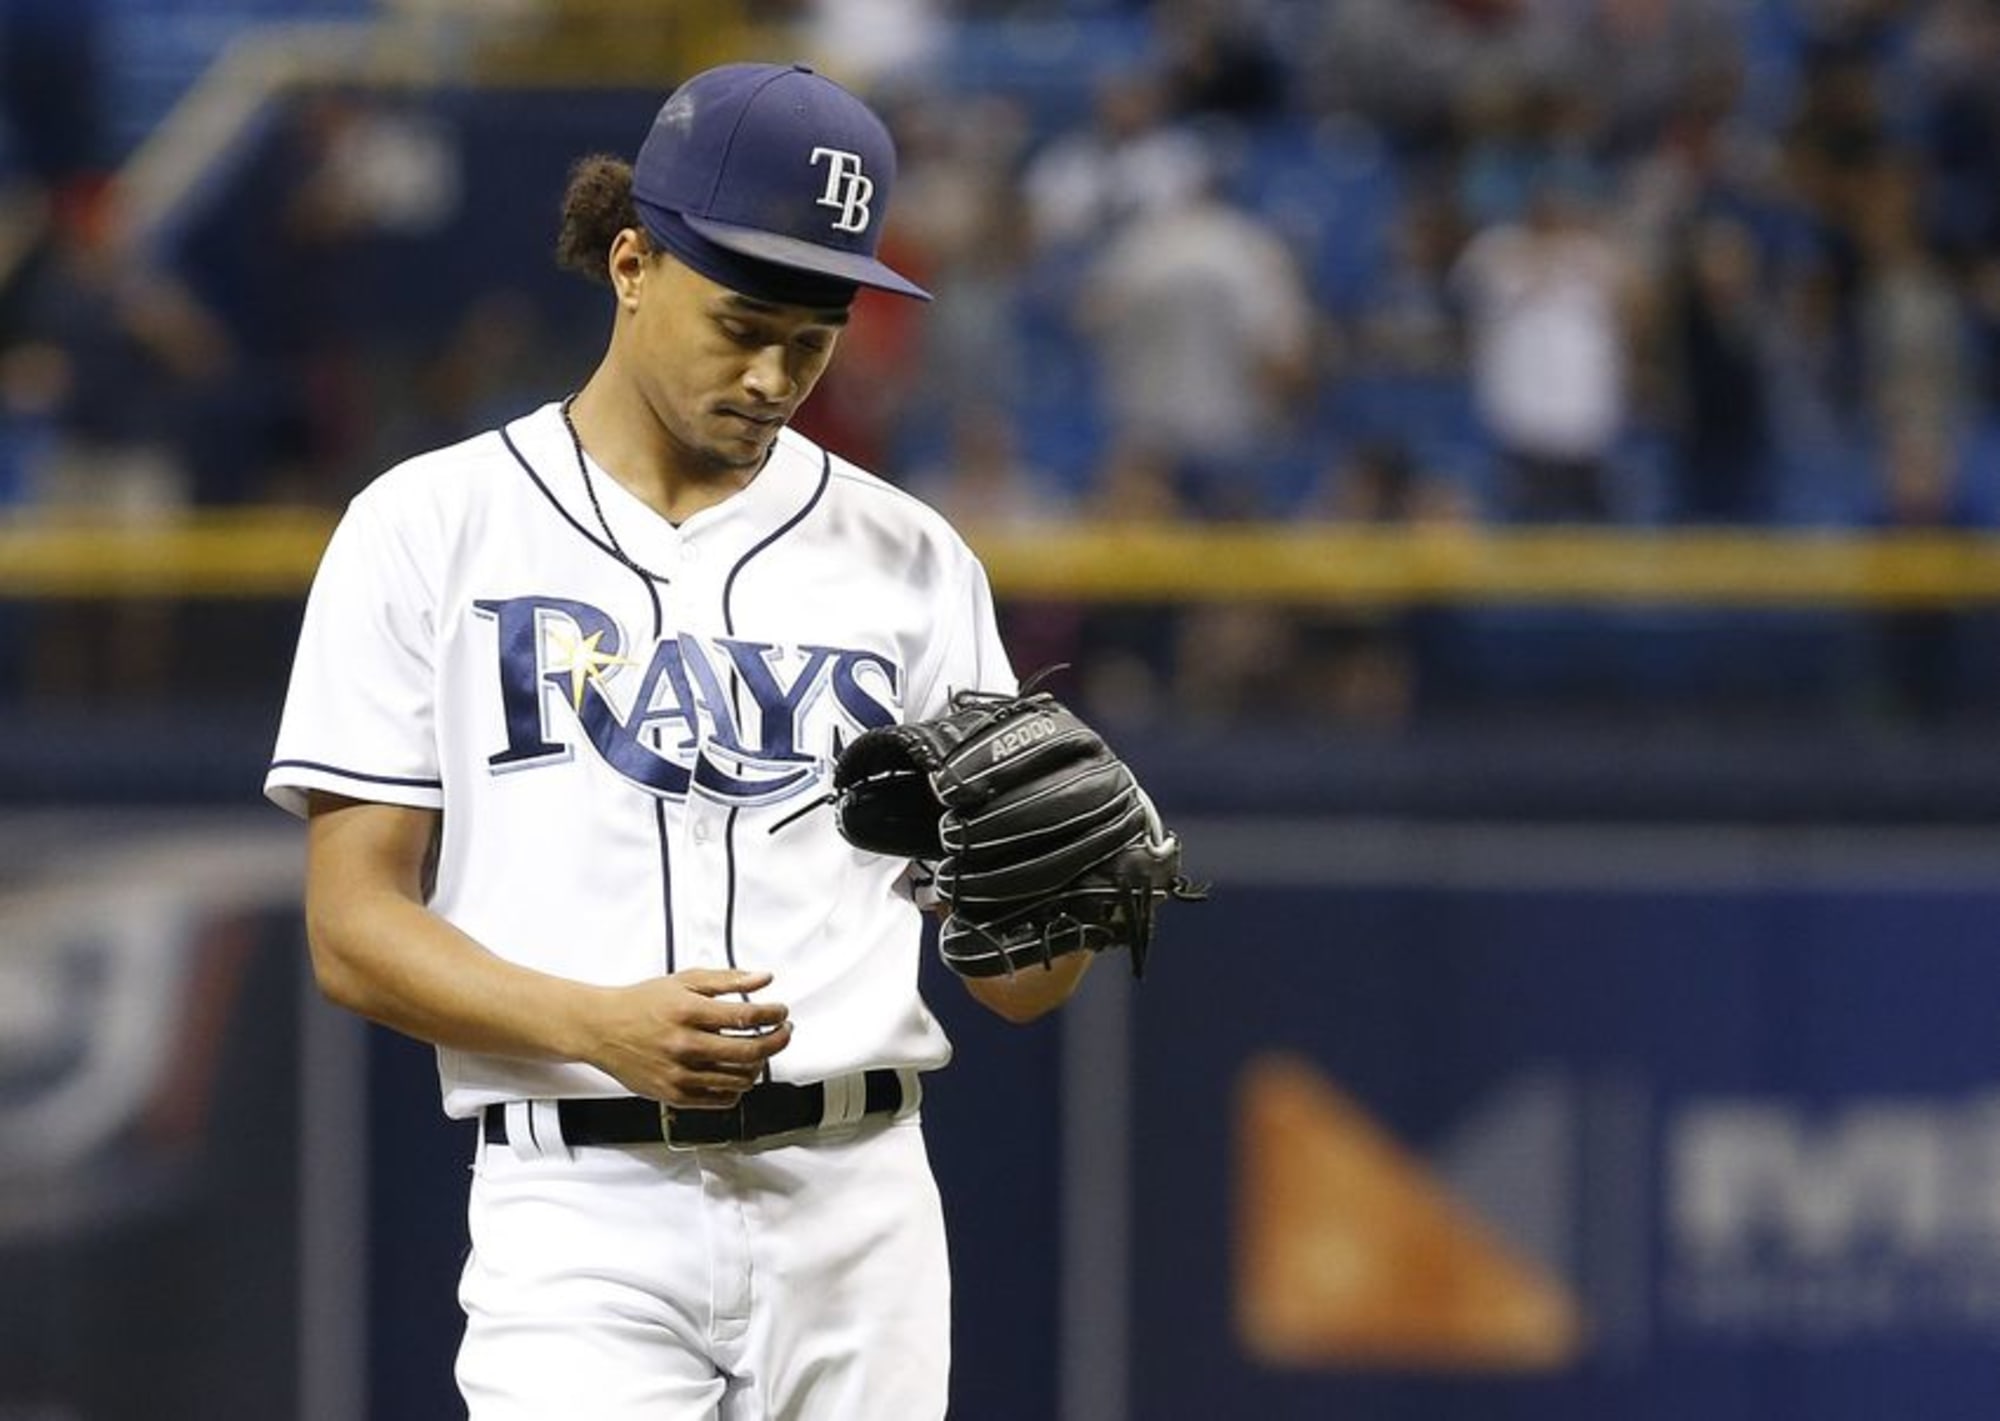 Tampa Bay Rays Won't Be Contenders Anytime Soon